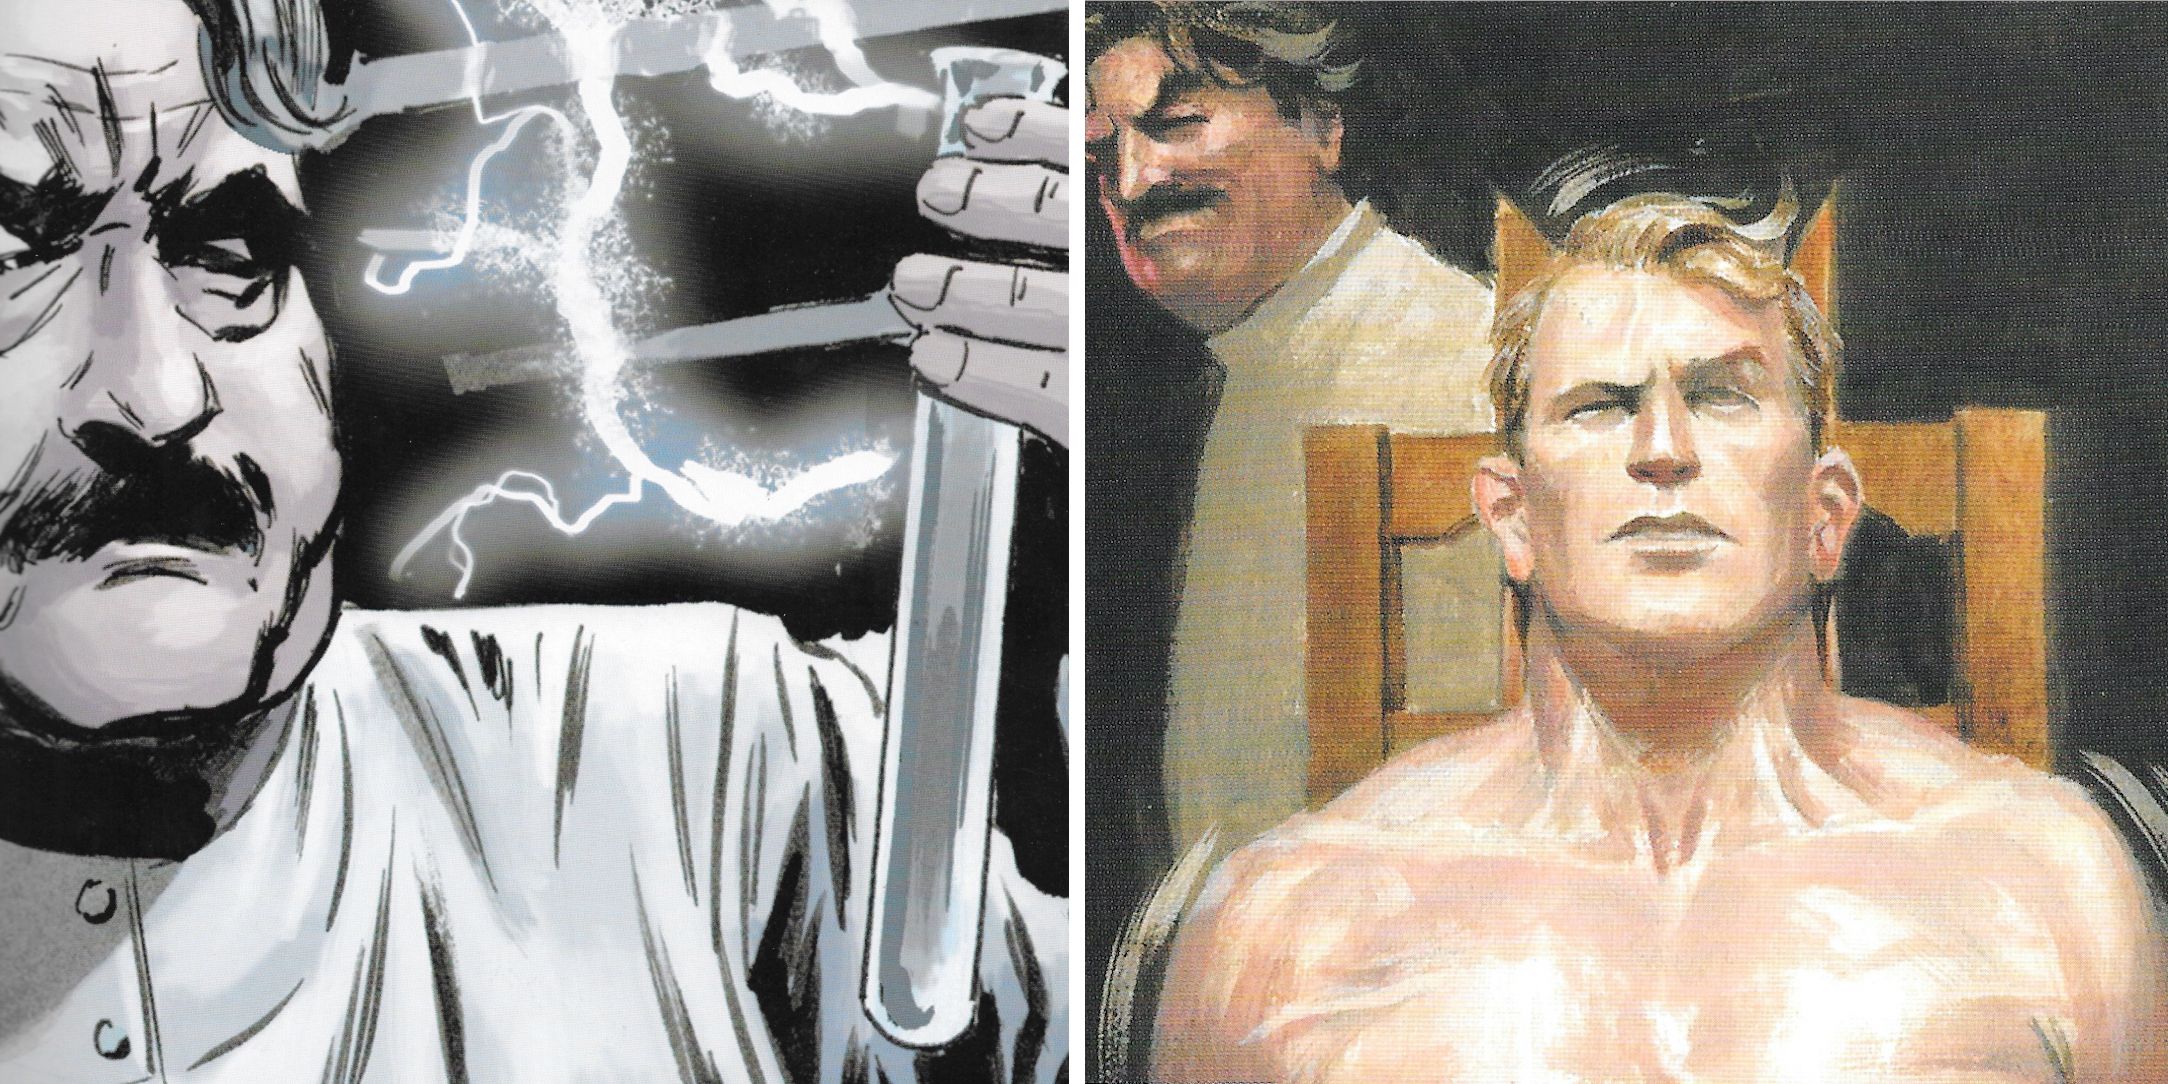 Steve Rogers takes the Super-Soldier Serum in Marvel Comics